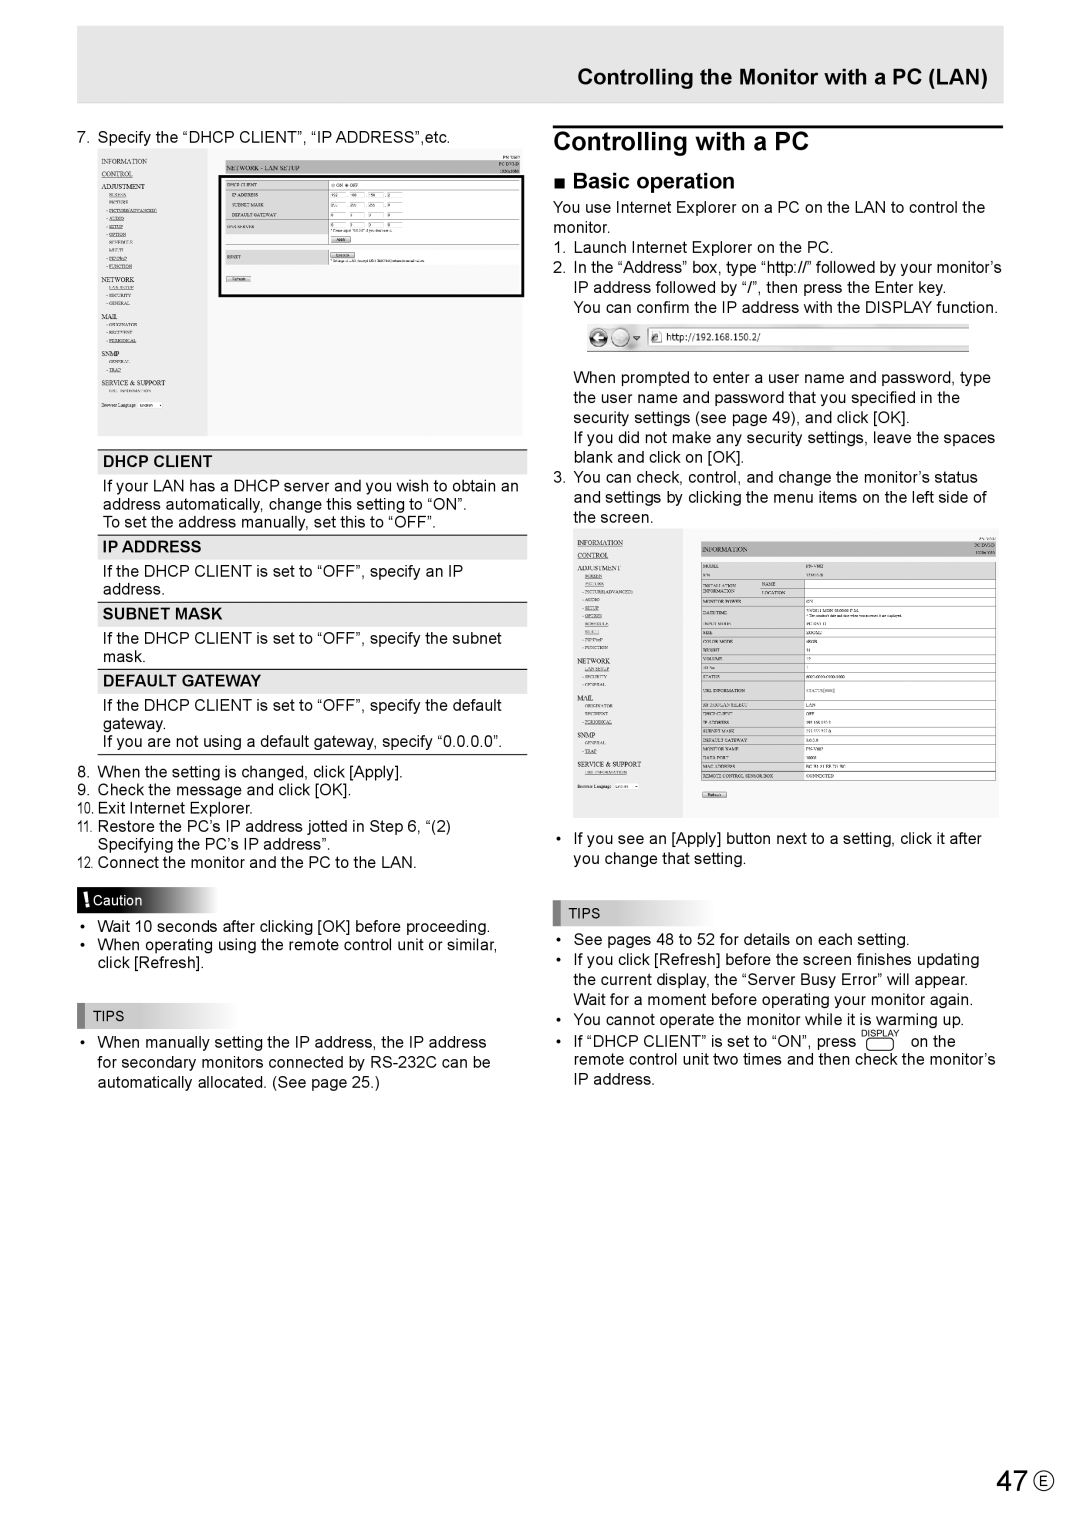 Sharp PN-V602 operation manual 47 E, Controlling with a PC, Controlling the Monitor with a PC LAN 